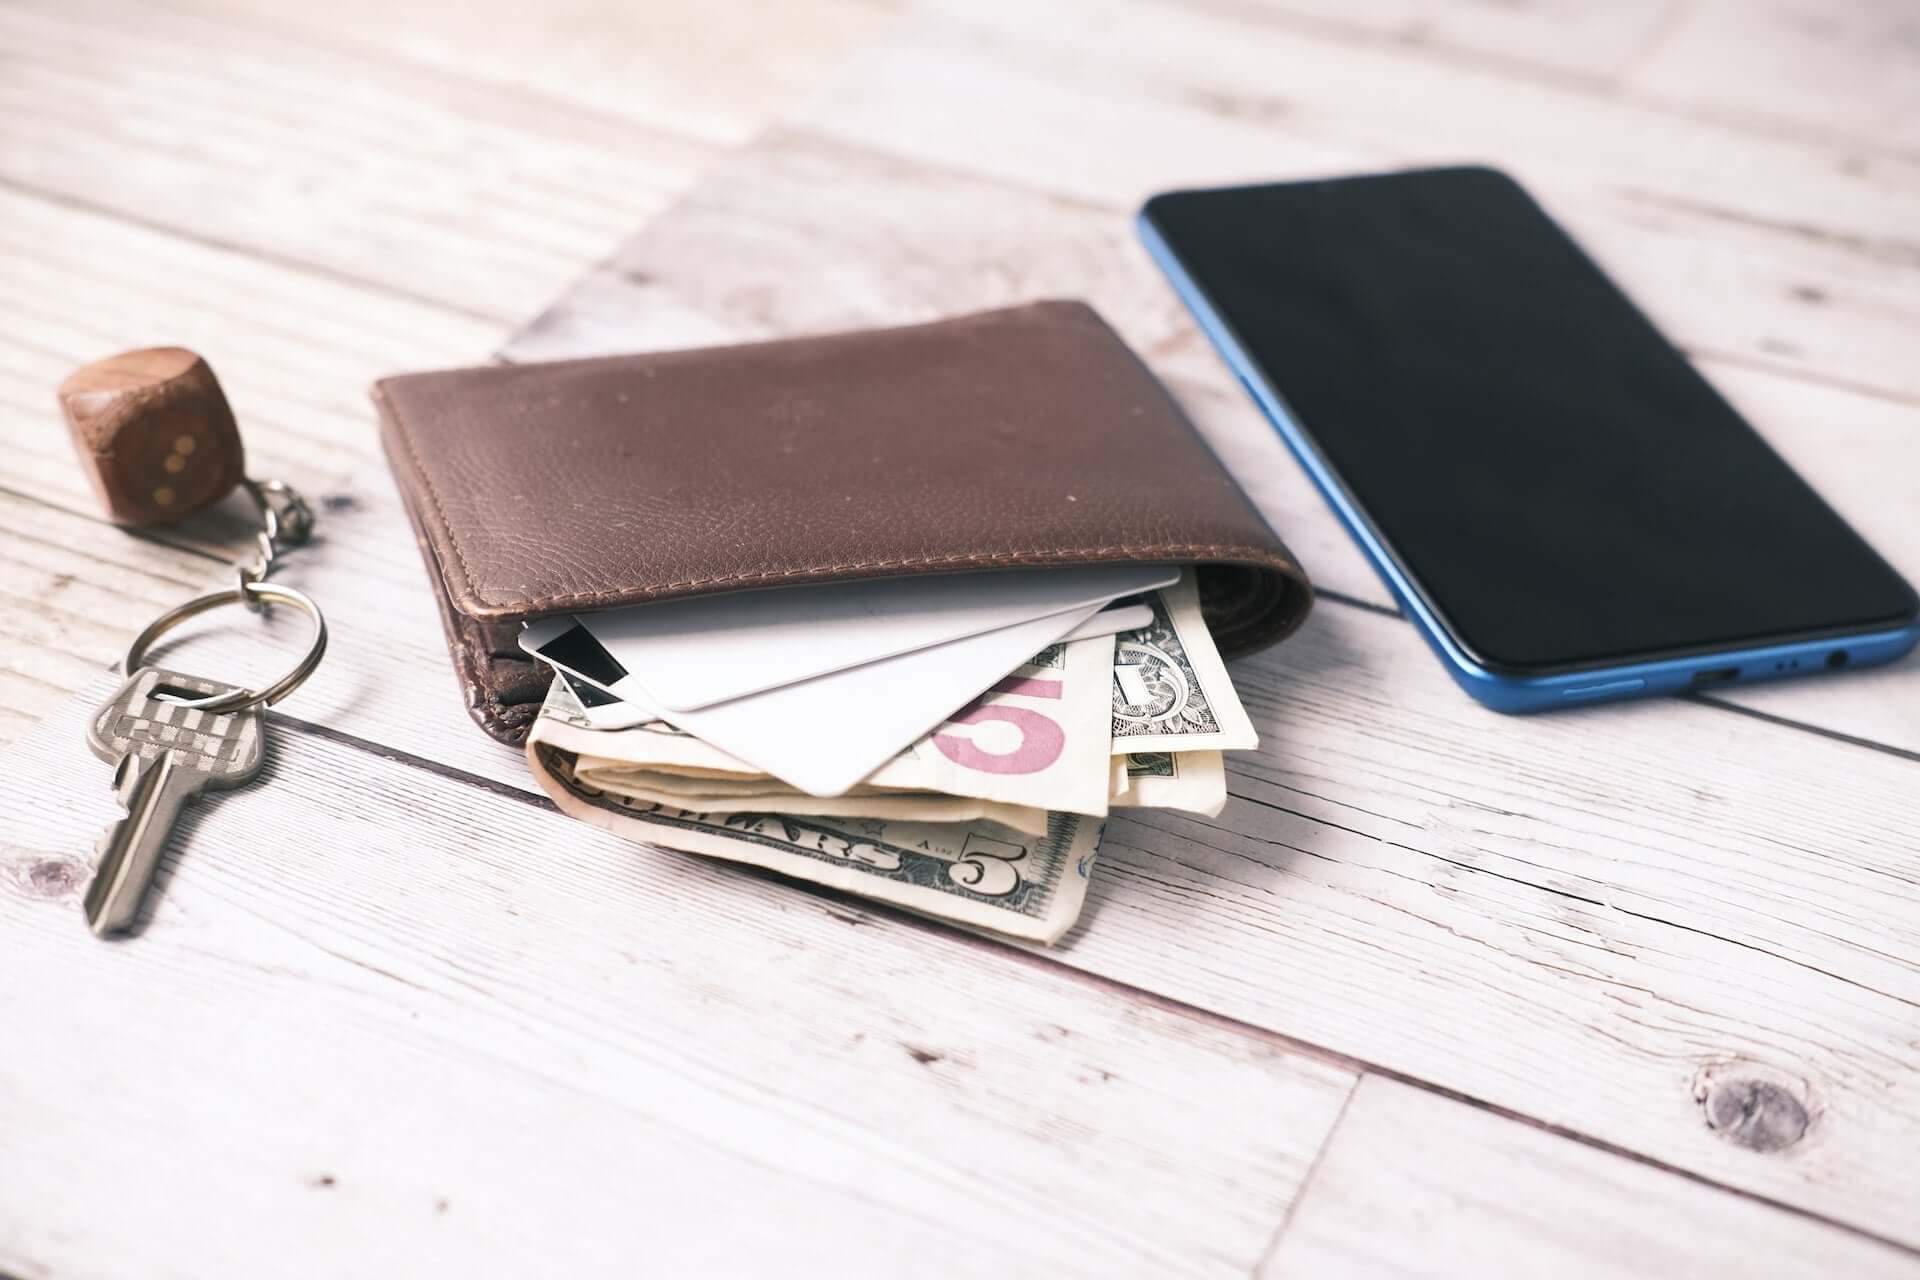 A bifold wallet full of American dollar bills sits beside a smartphone and a set of keys.